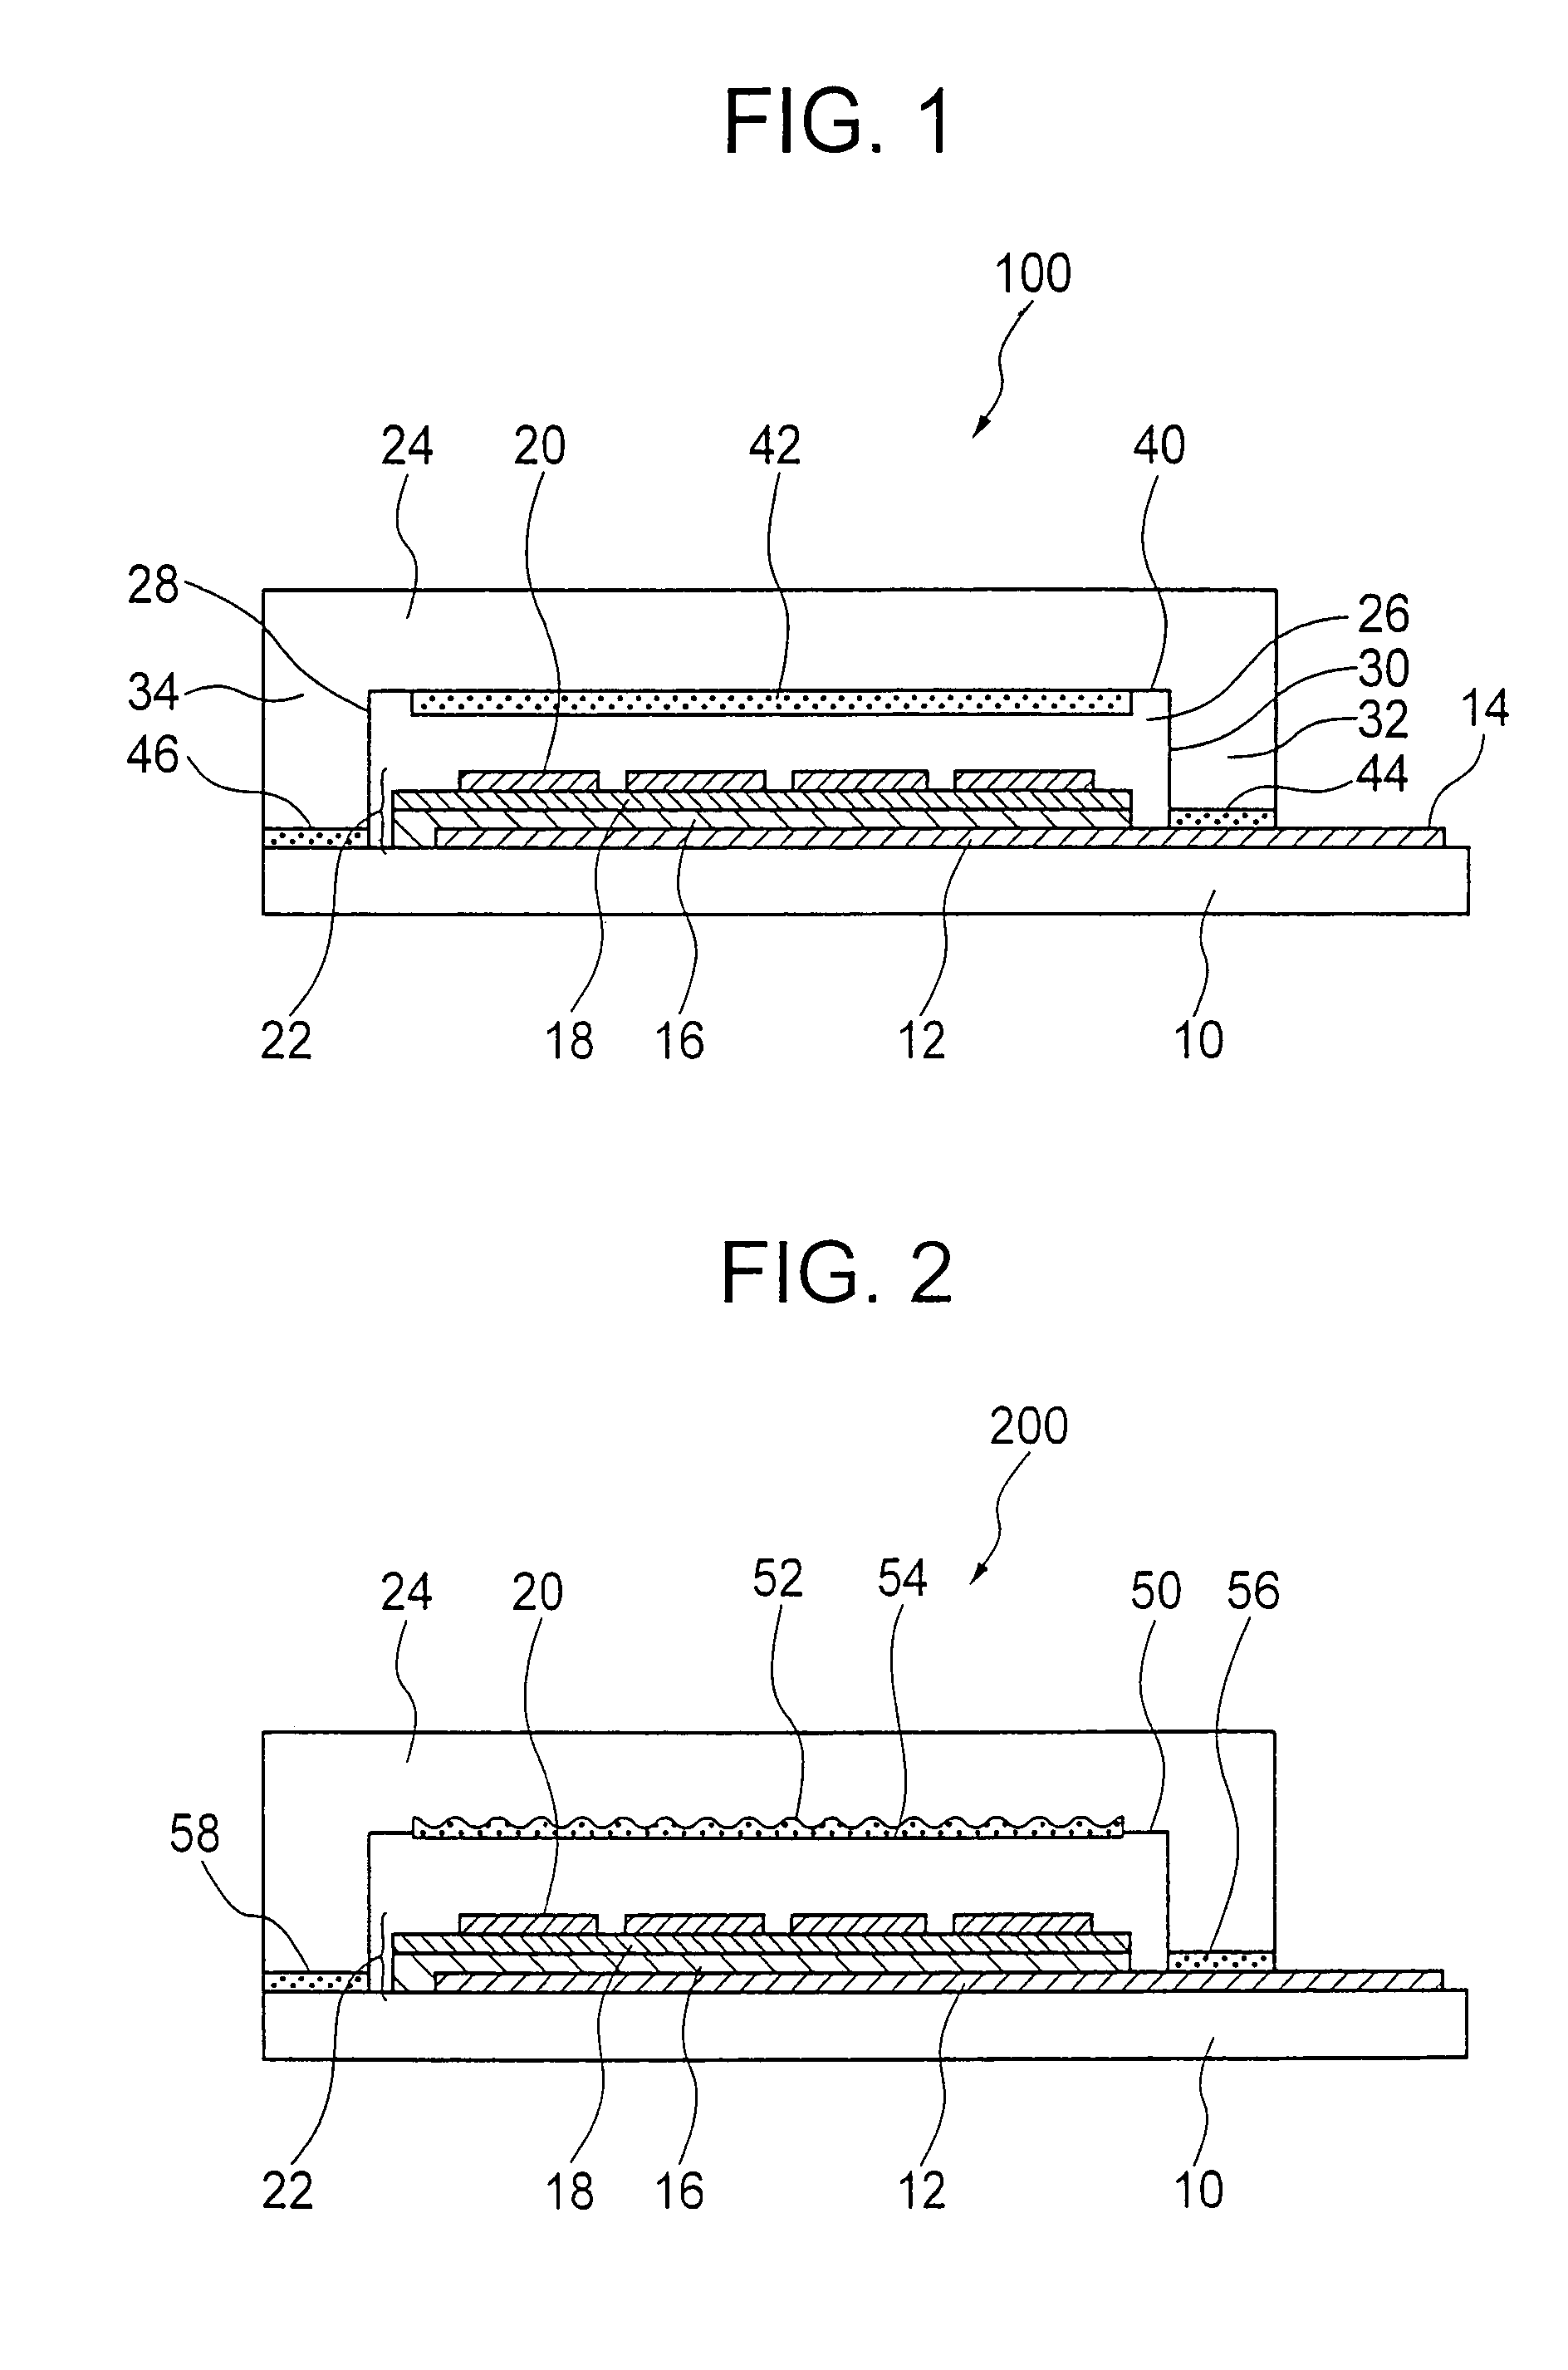 Organic electroluminescent device and method for fabricating same